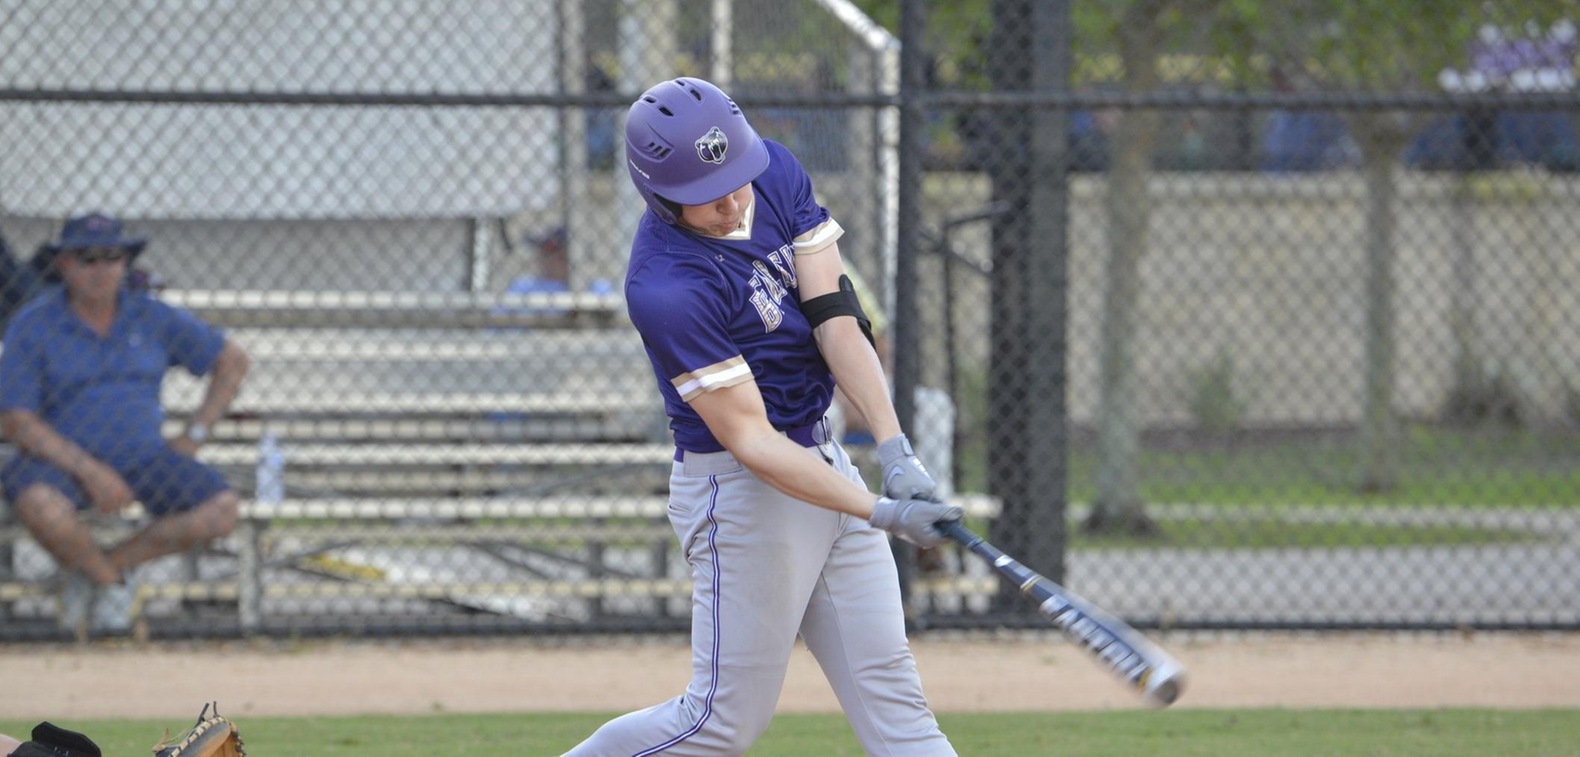 Anthony Lind went 3-for-4 with a triple, stolen base, and three RBI in Monday's victory over St. Thomas.